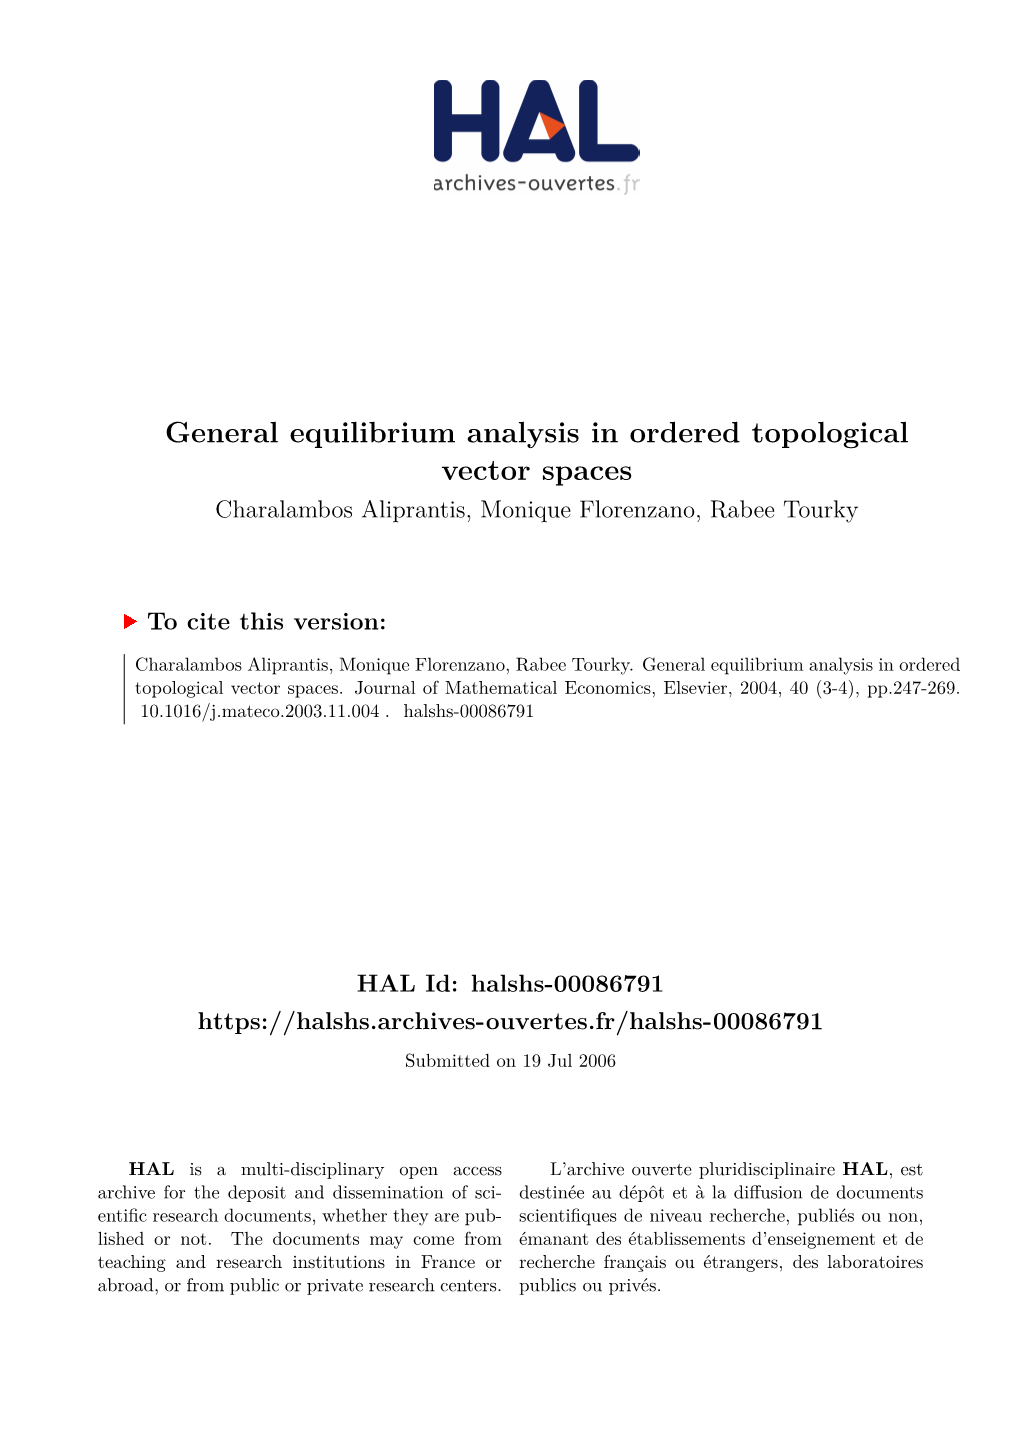 General Equilibrium Analysis in Ordered Topological Vector Spaces Charalambos Aliprantis, Monique Florenzano, Rabee Tourky